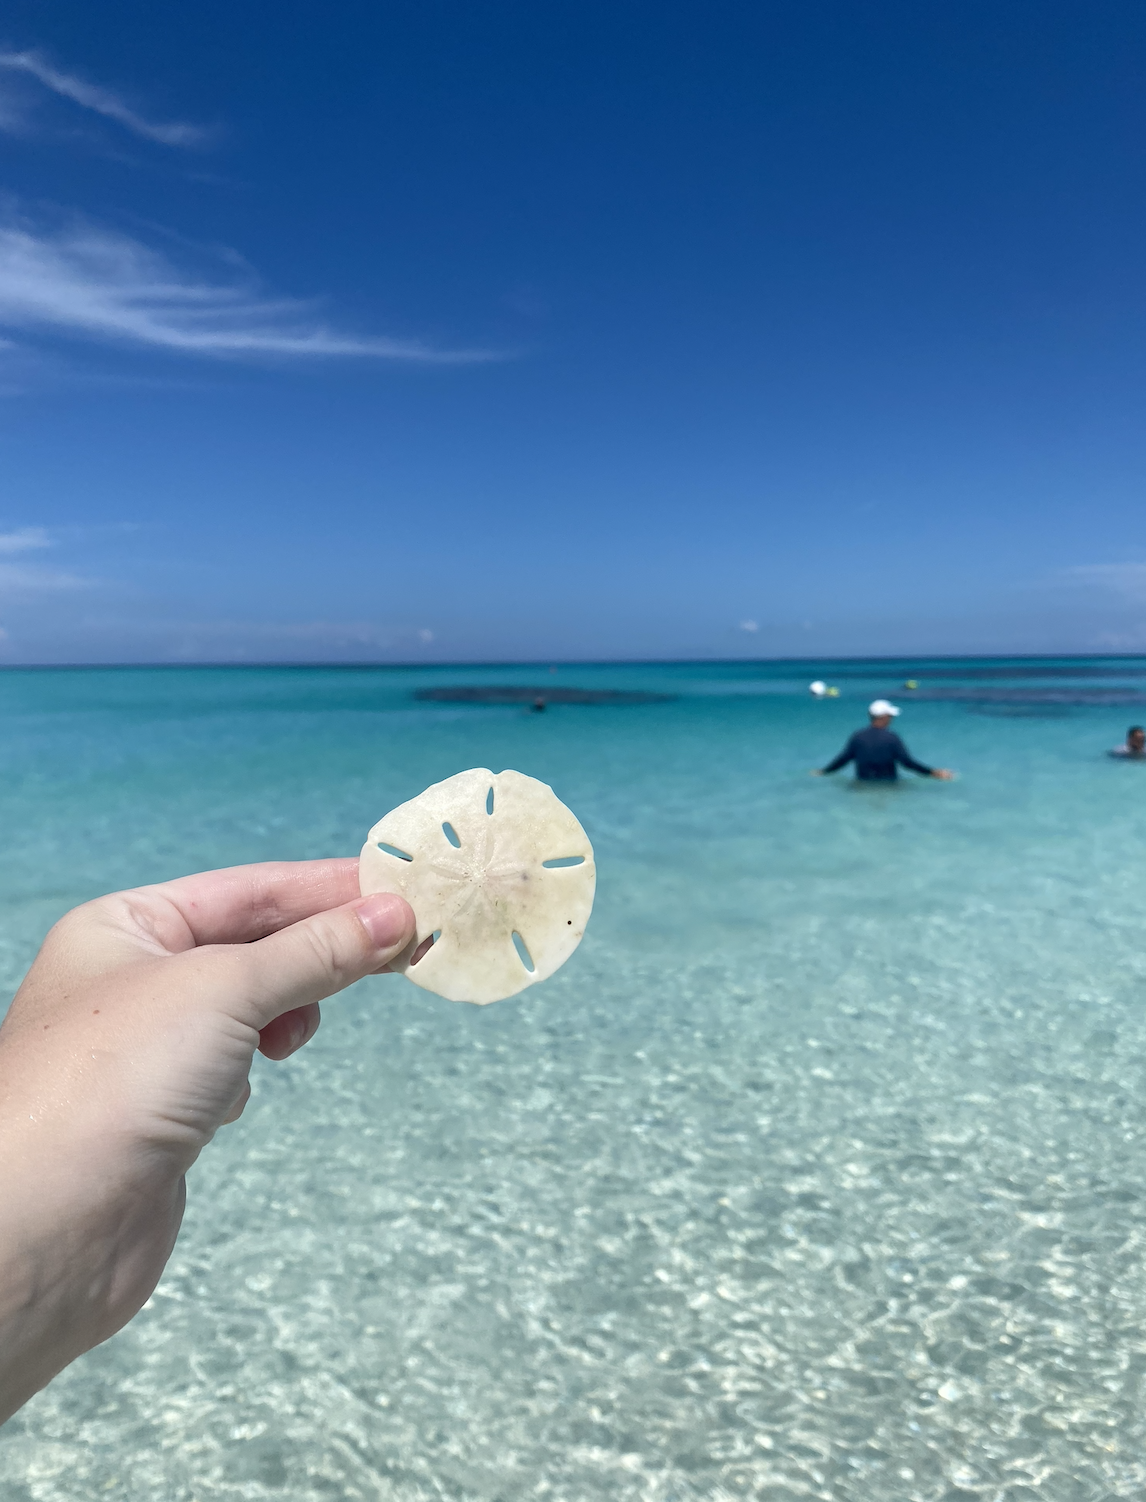 A hand holds a sand dollar over clear, shallow ocean water. A person is swimming in the distance under a blue sky